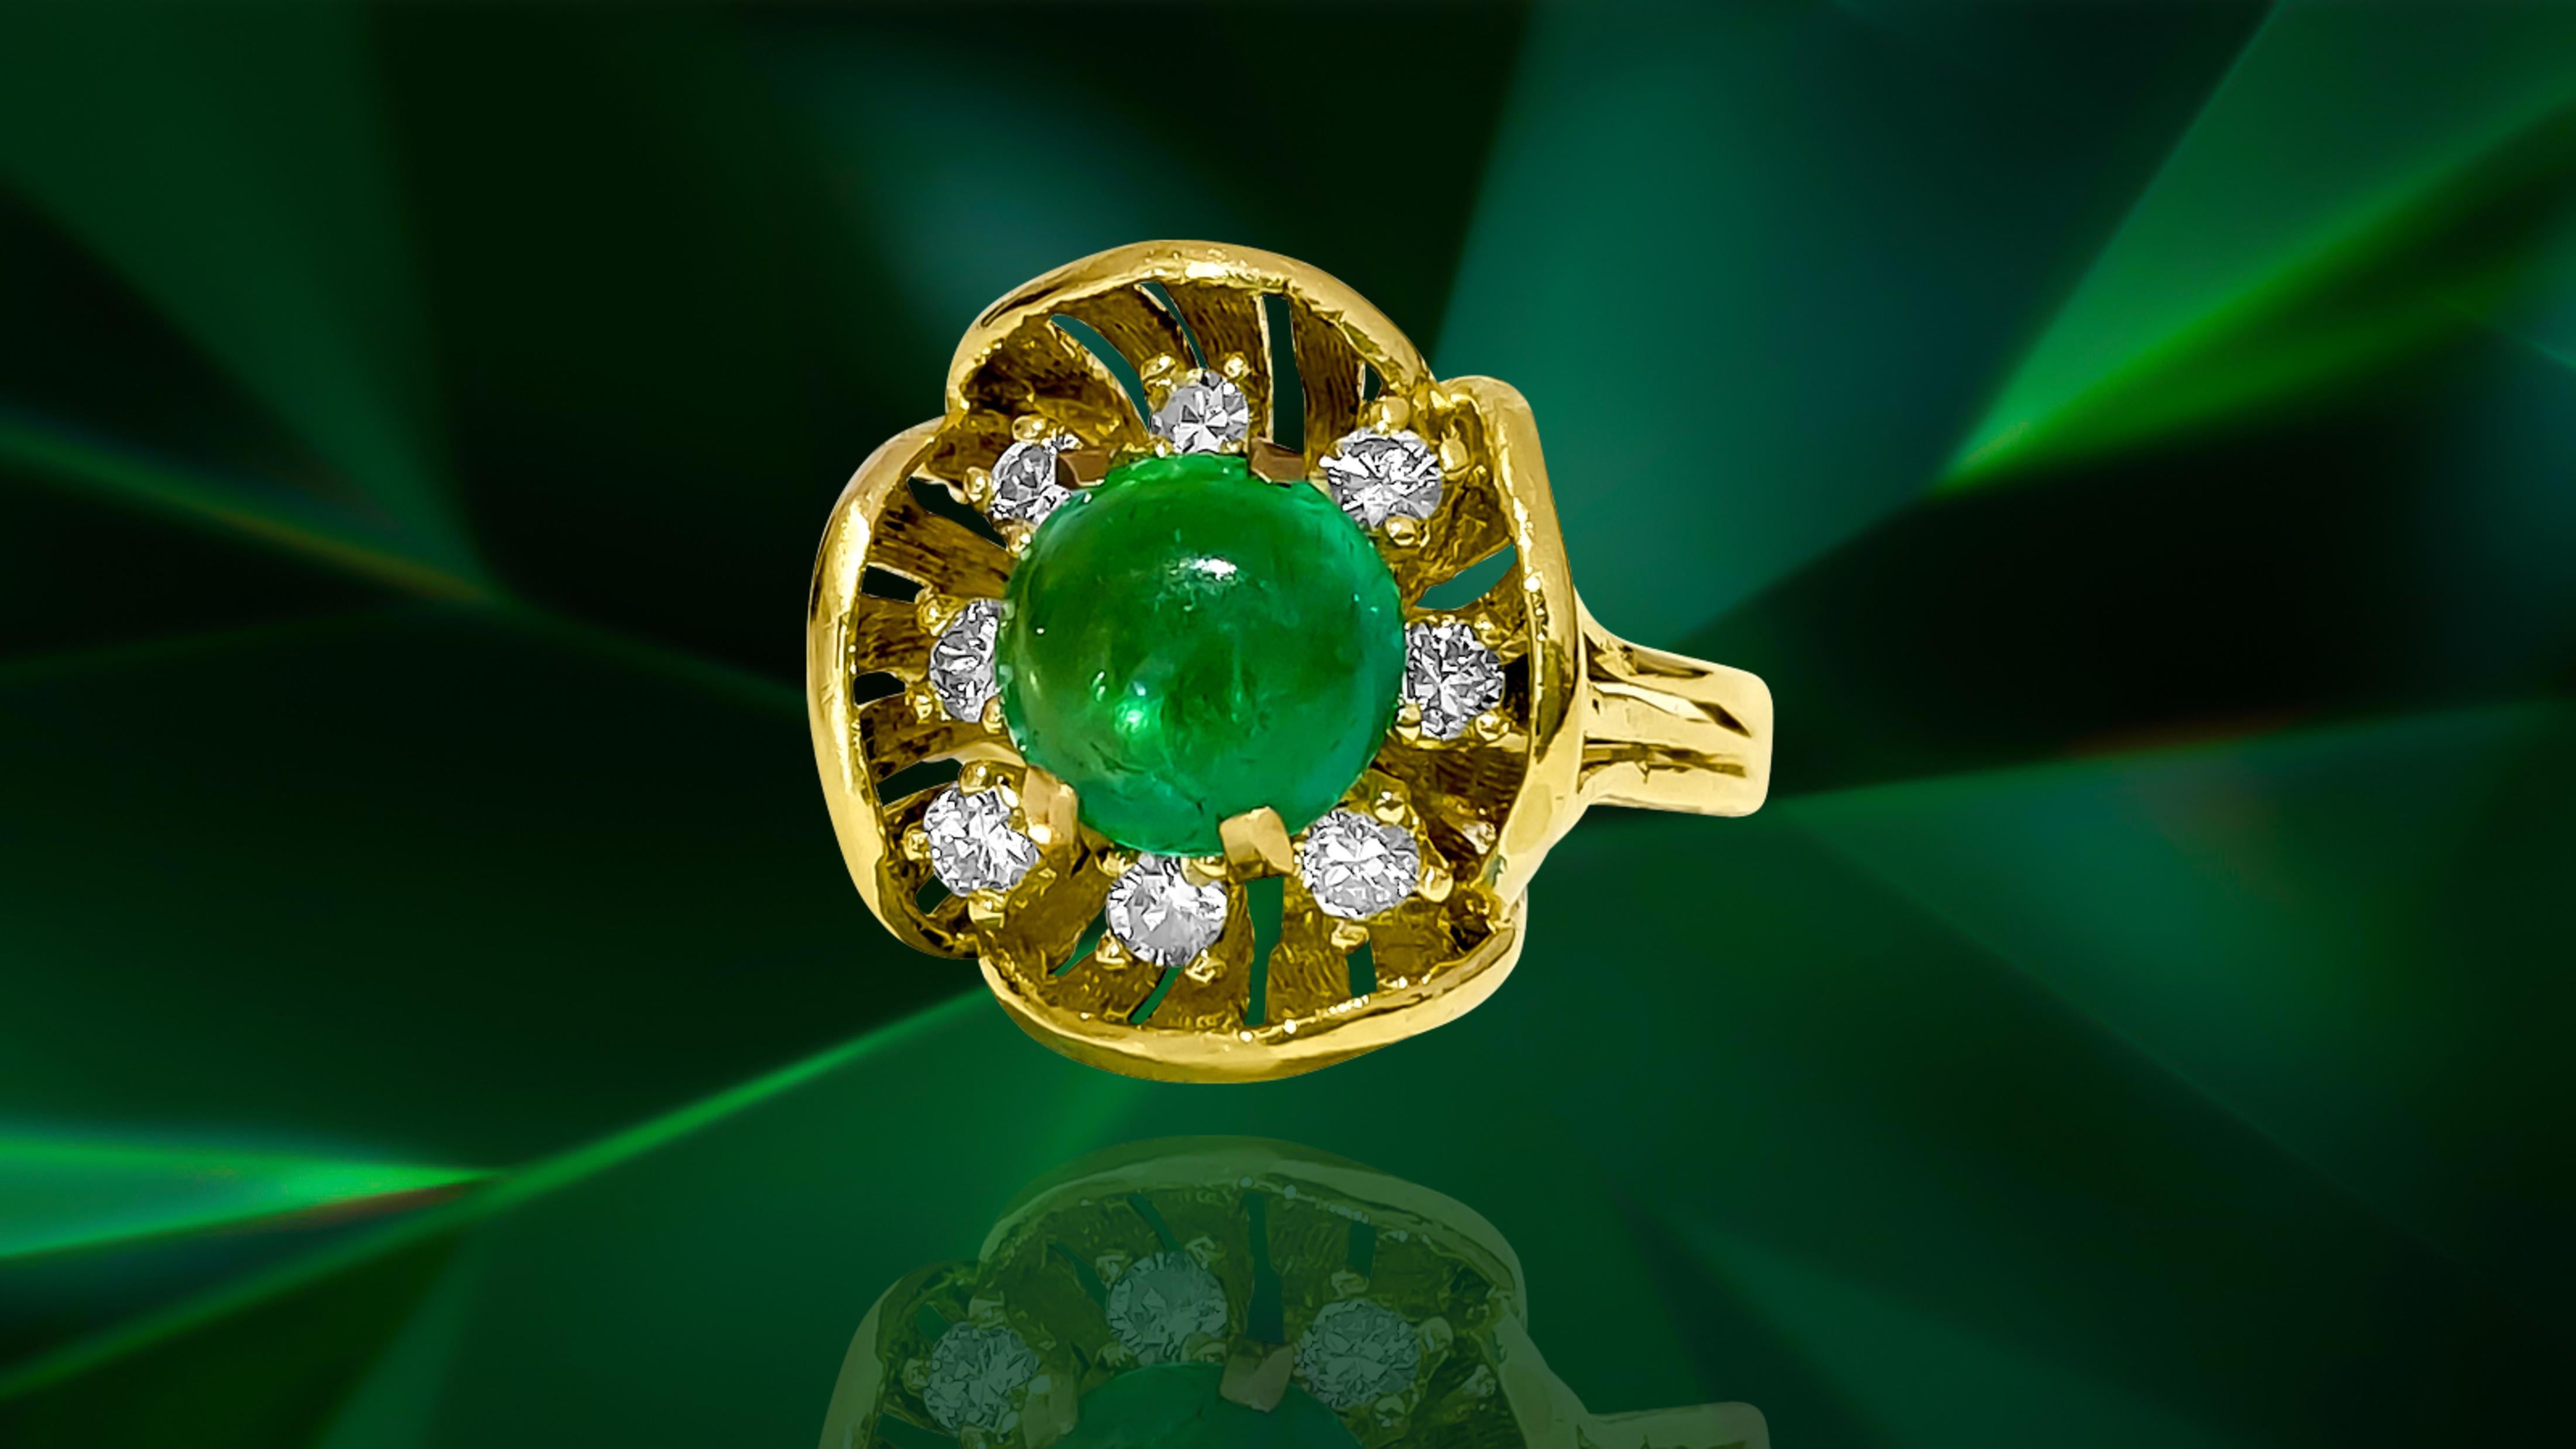 Vintage 18K Gold 2.90 Carat Diamond Emerald Ring In Excellent Condition For Sale In Miami, FL